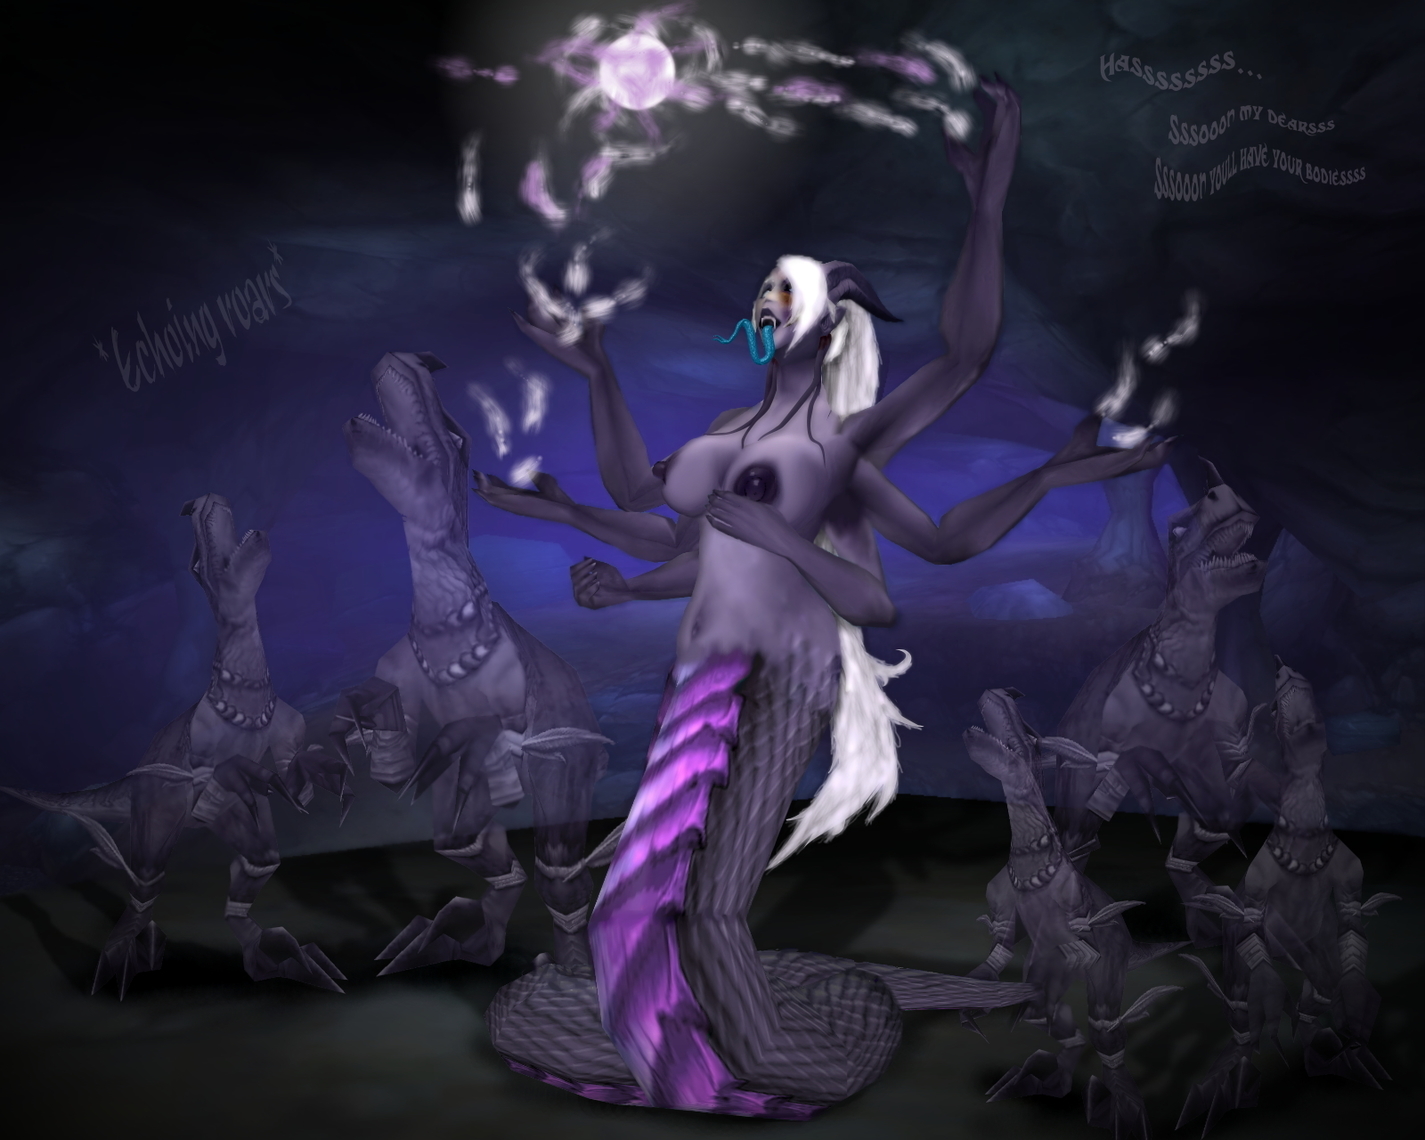 Sssssserpent Queen [Darkside/Draenei/Anthro/Naga]
Trying out another mixed anthro picture, using Sel and Naga.
Keywords: Darkside;OC;Draenei;Anthro;Naga